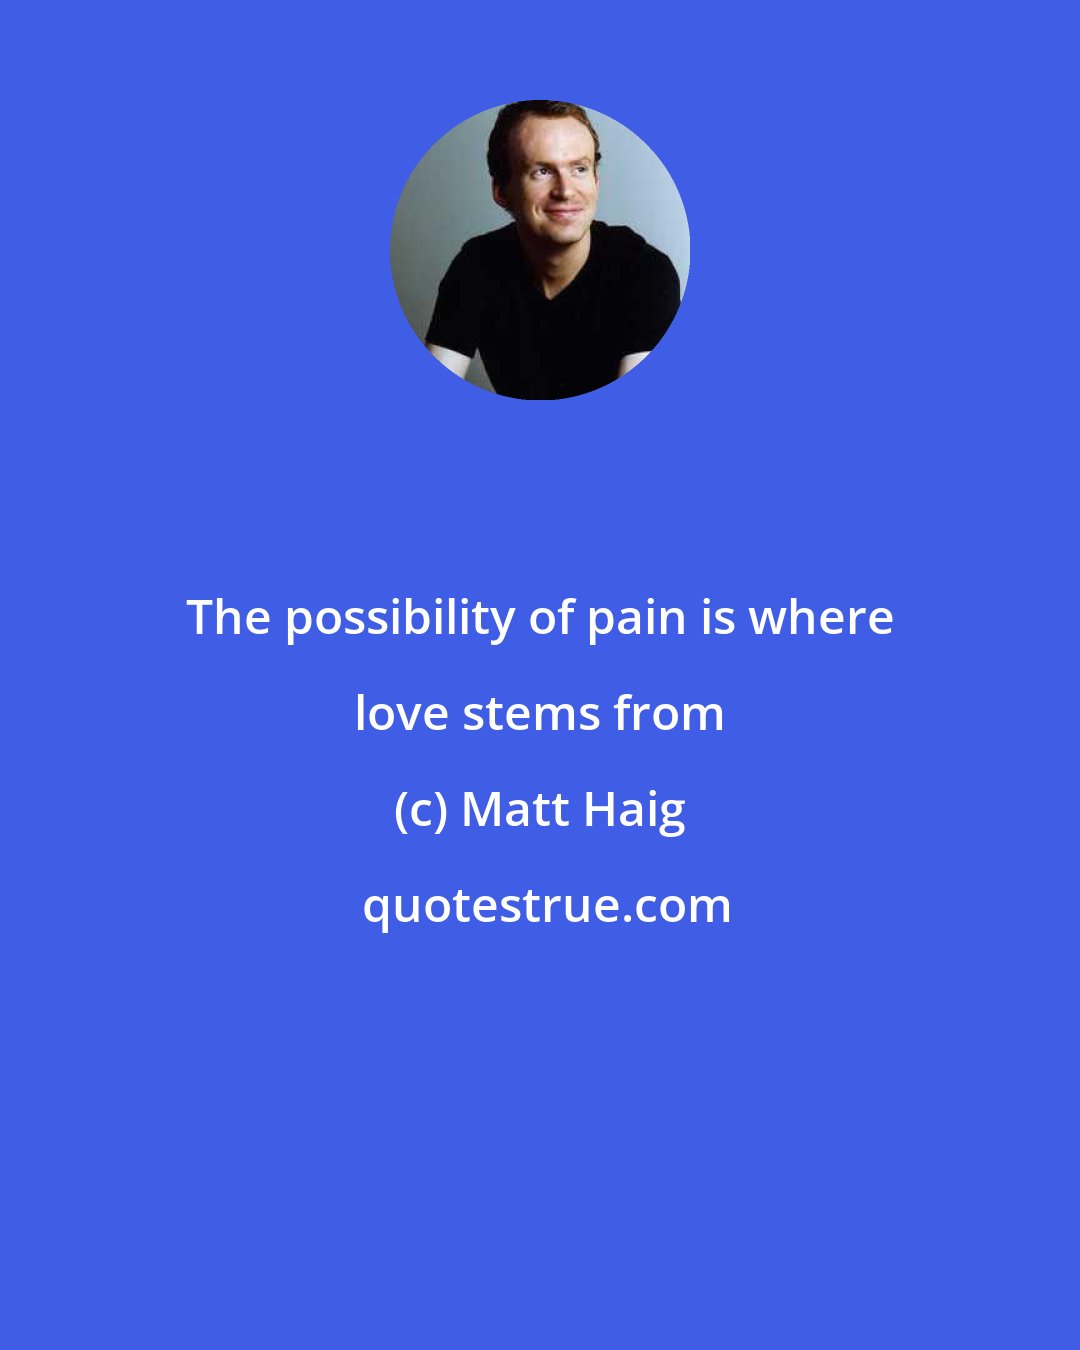 Matt Haig: The possibility of pain is where love stems from